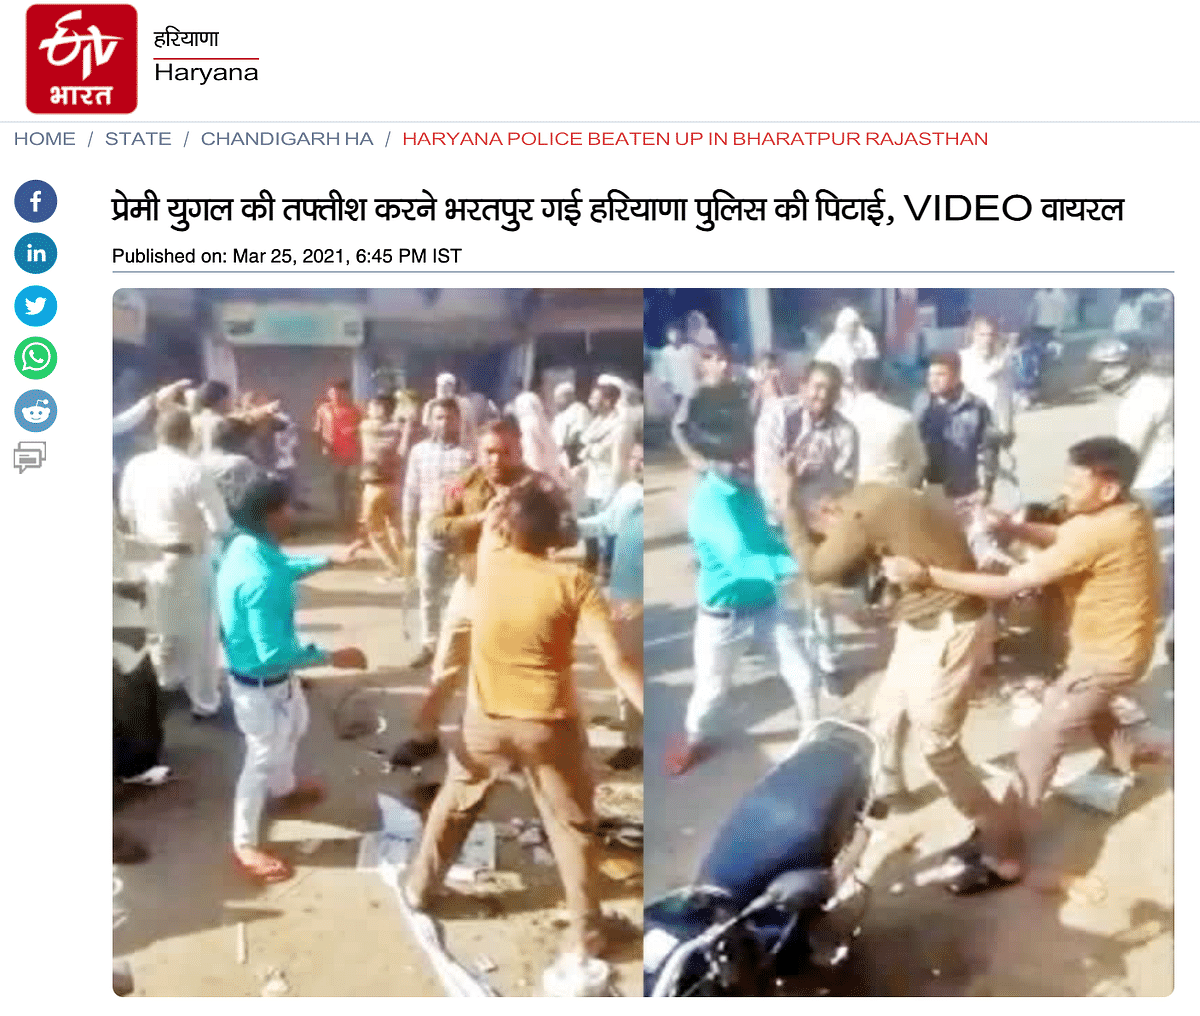 The video is from Rajasthan and shows a fight between a cop and locals after the latter’s jeep hit a local leader.